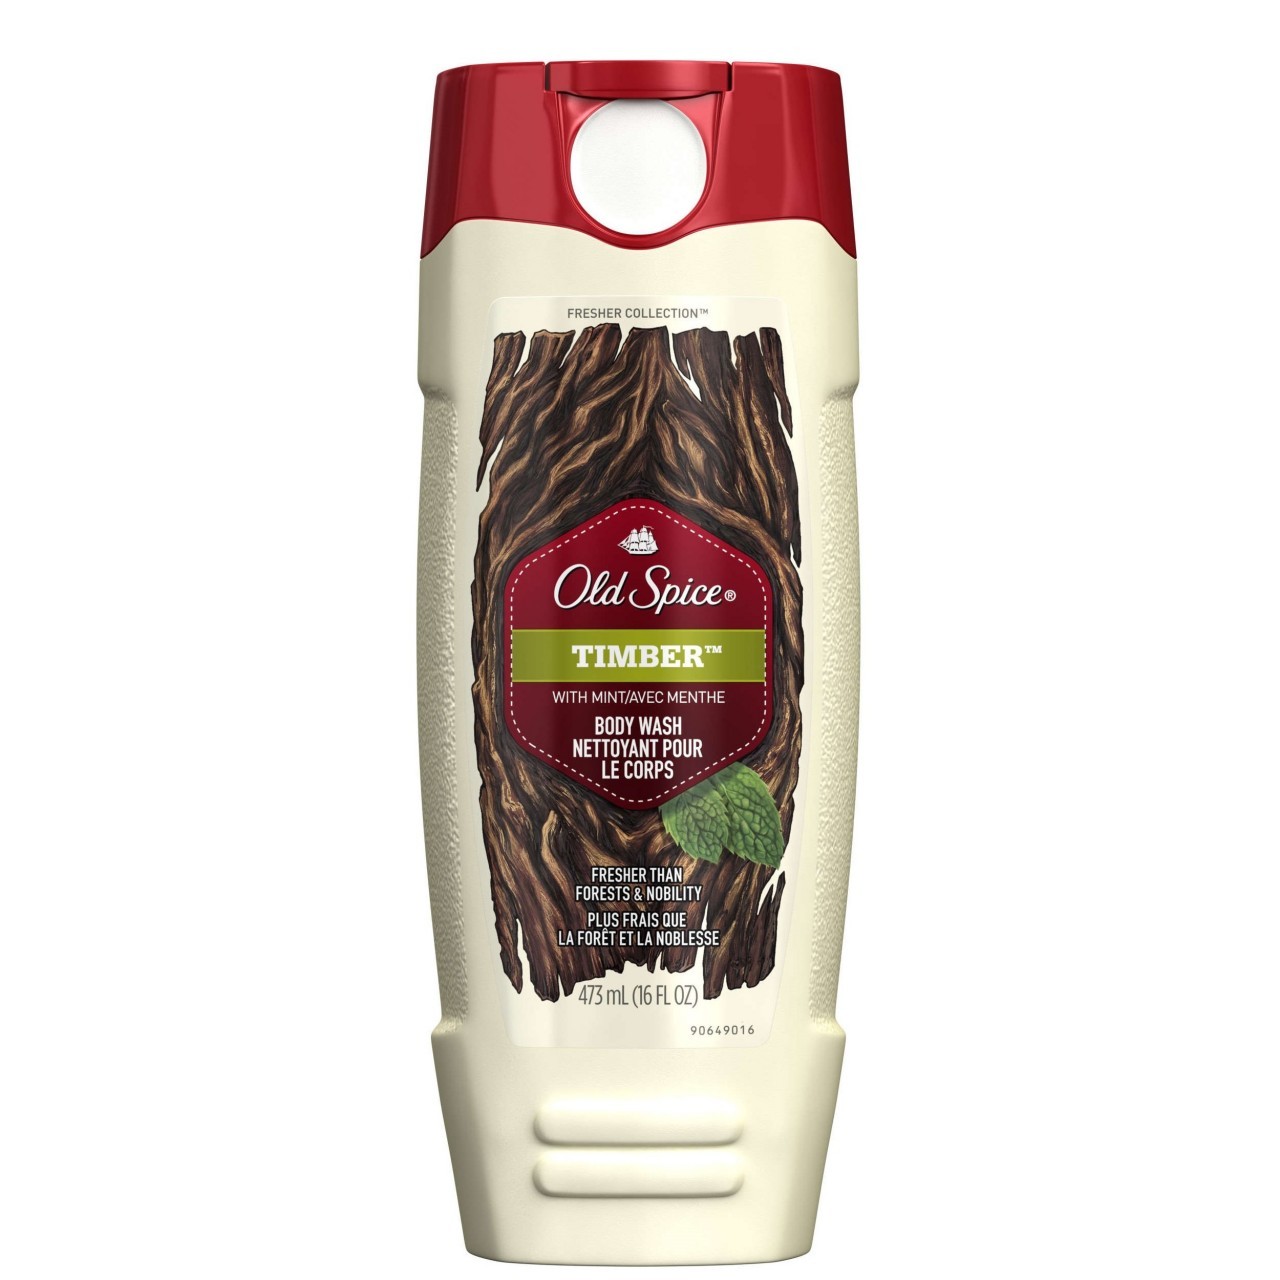 OLD SPICE BODY WASH TIMBER 16oz